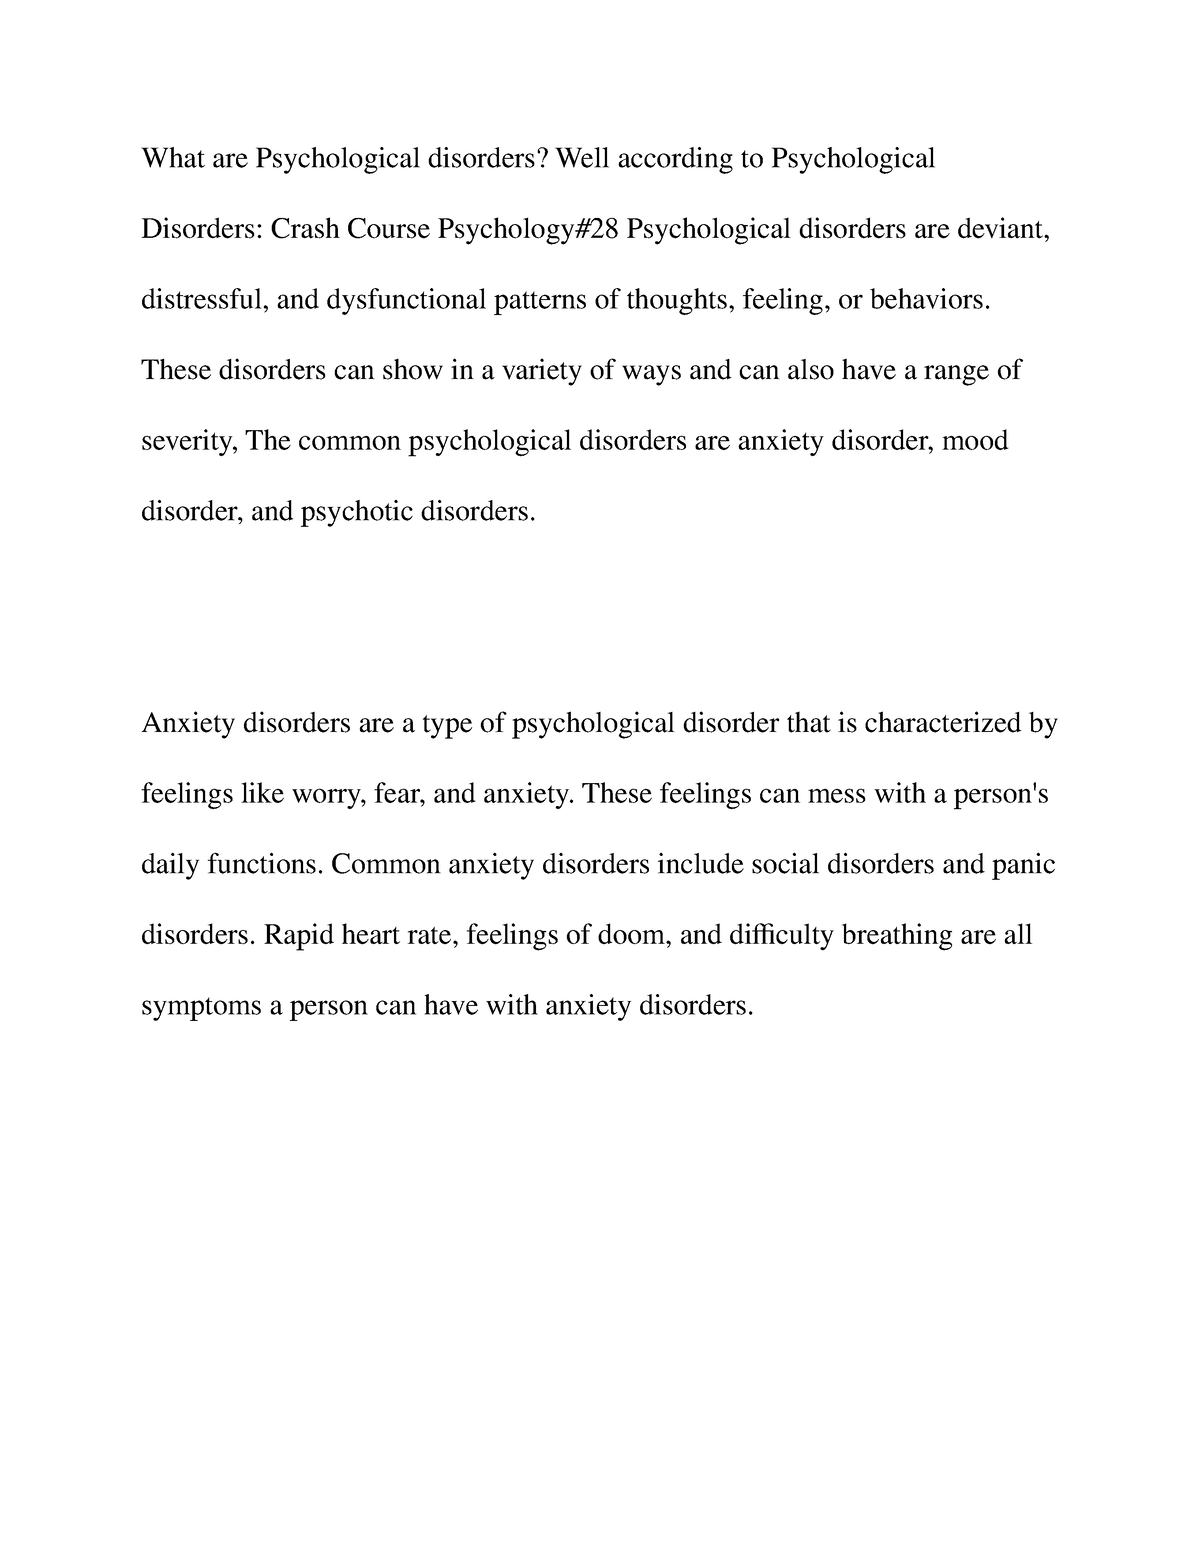 what is psychological disorders essay